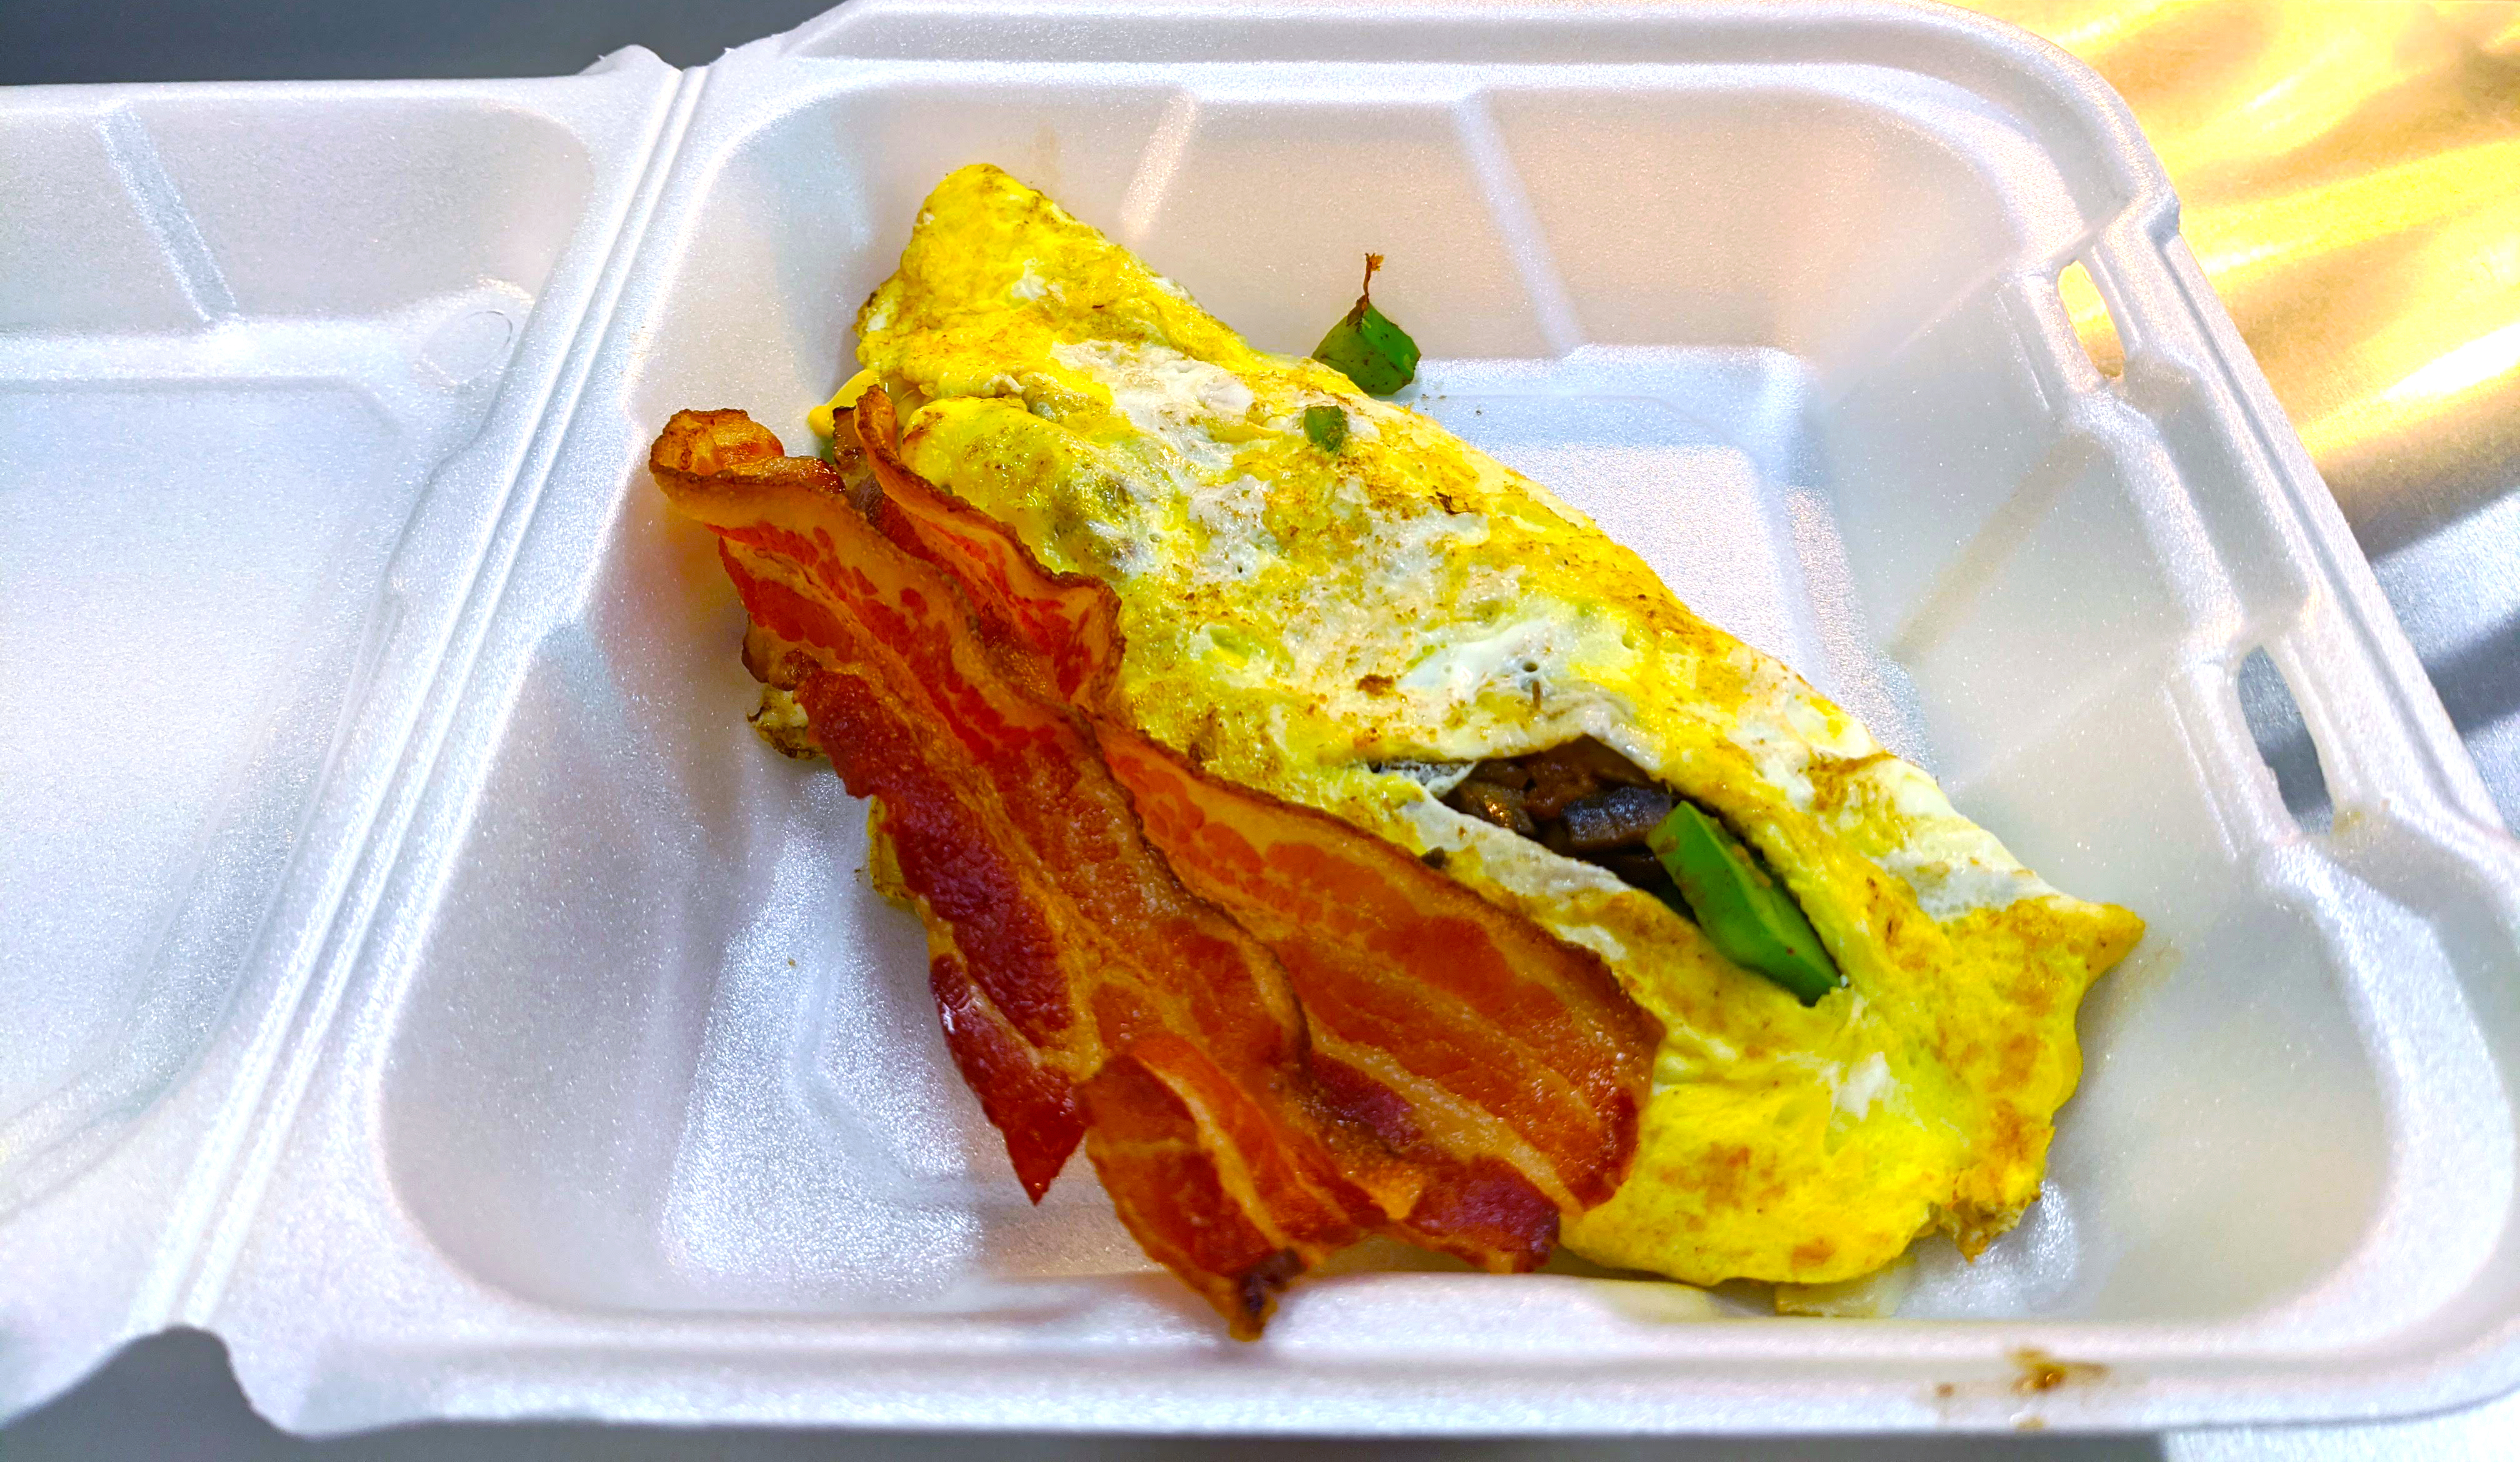 Omelet with bacon